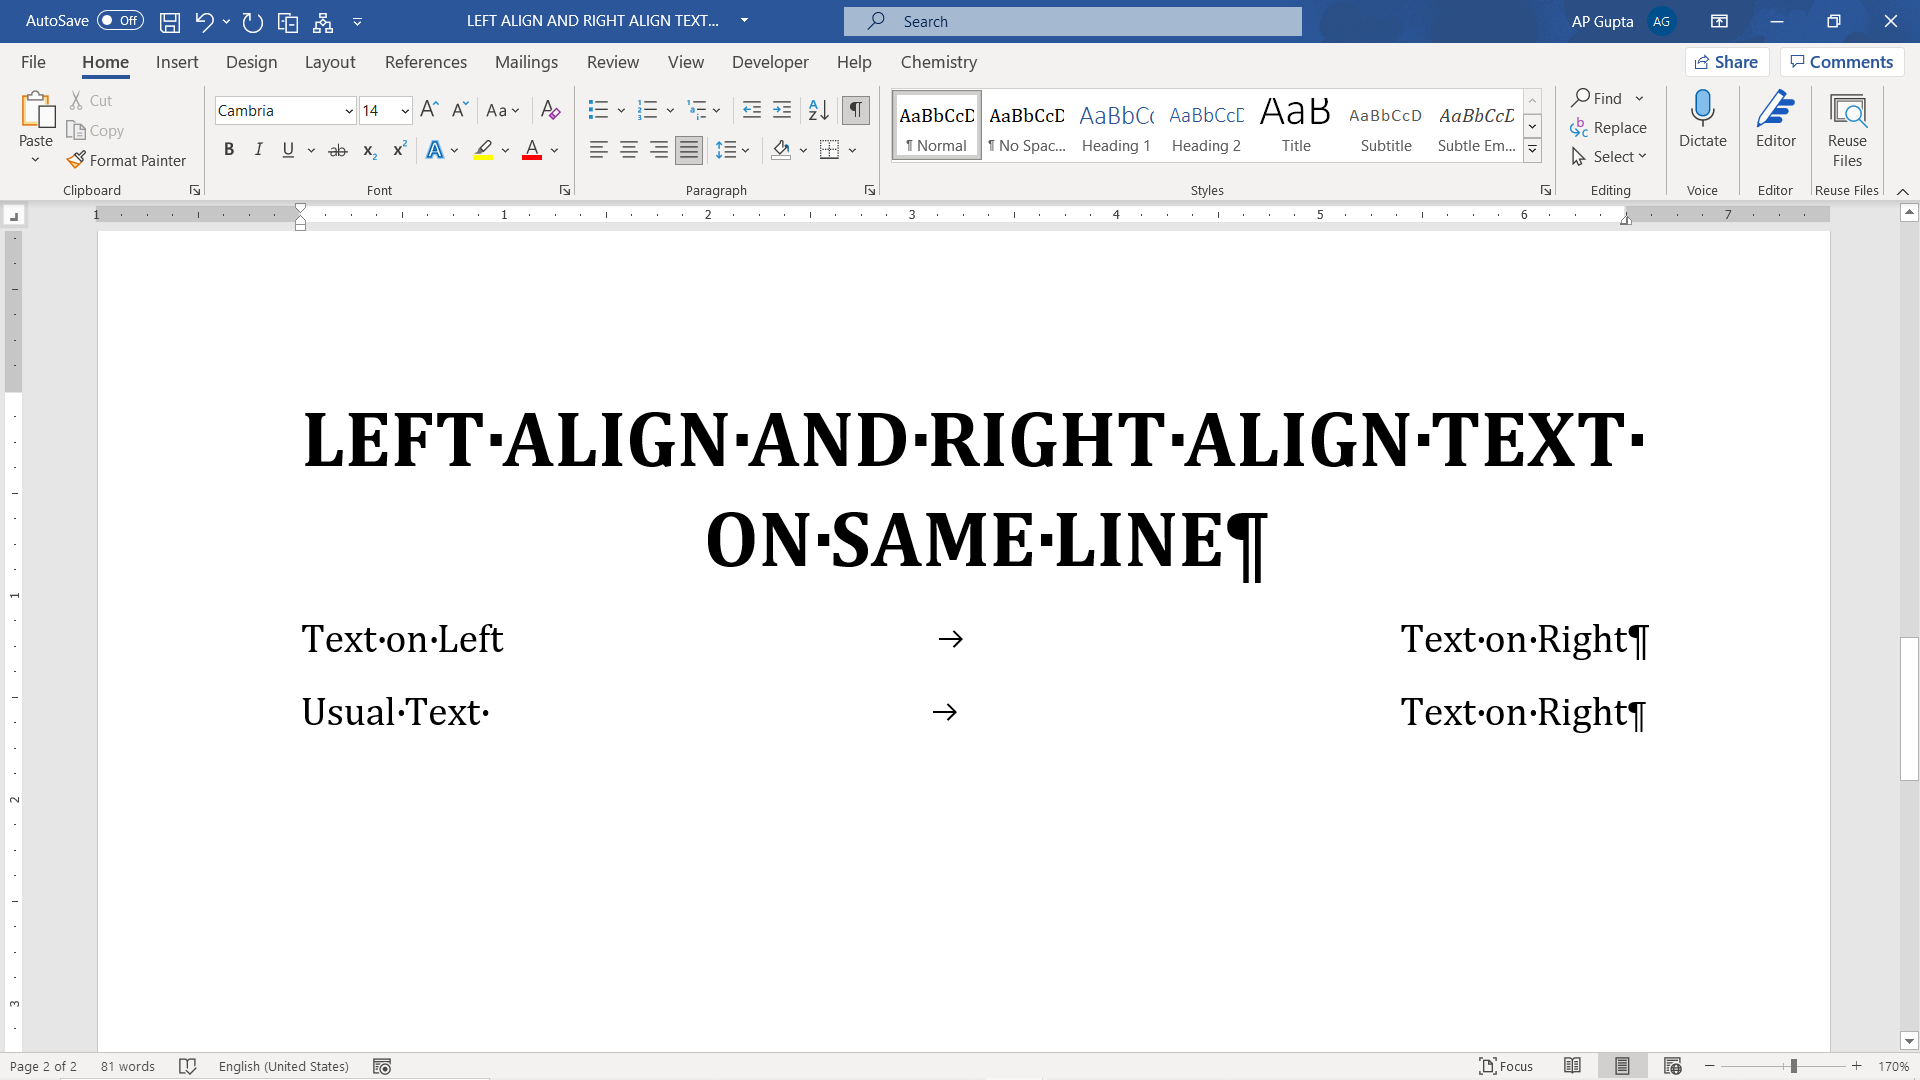 How to align text left and right on same line in Ms Word